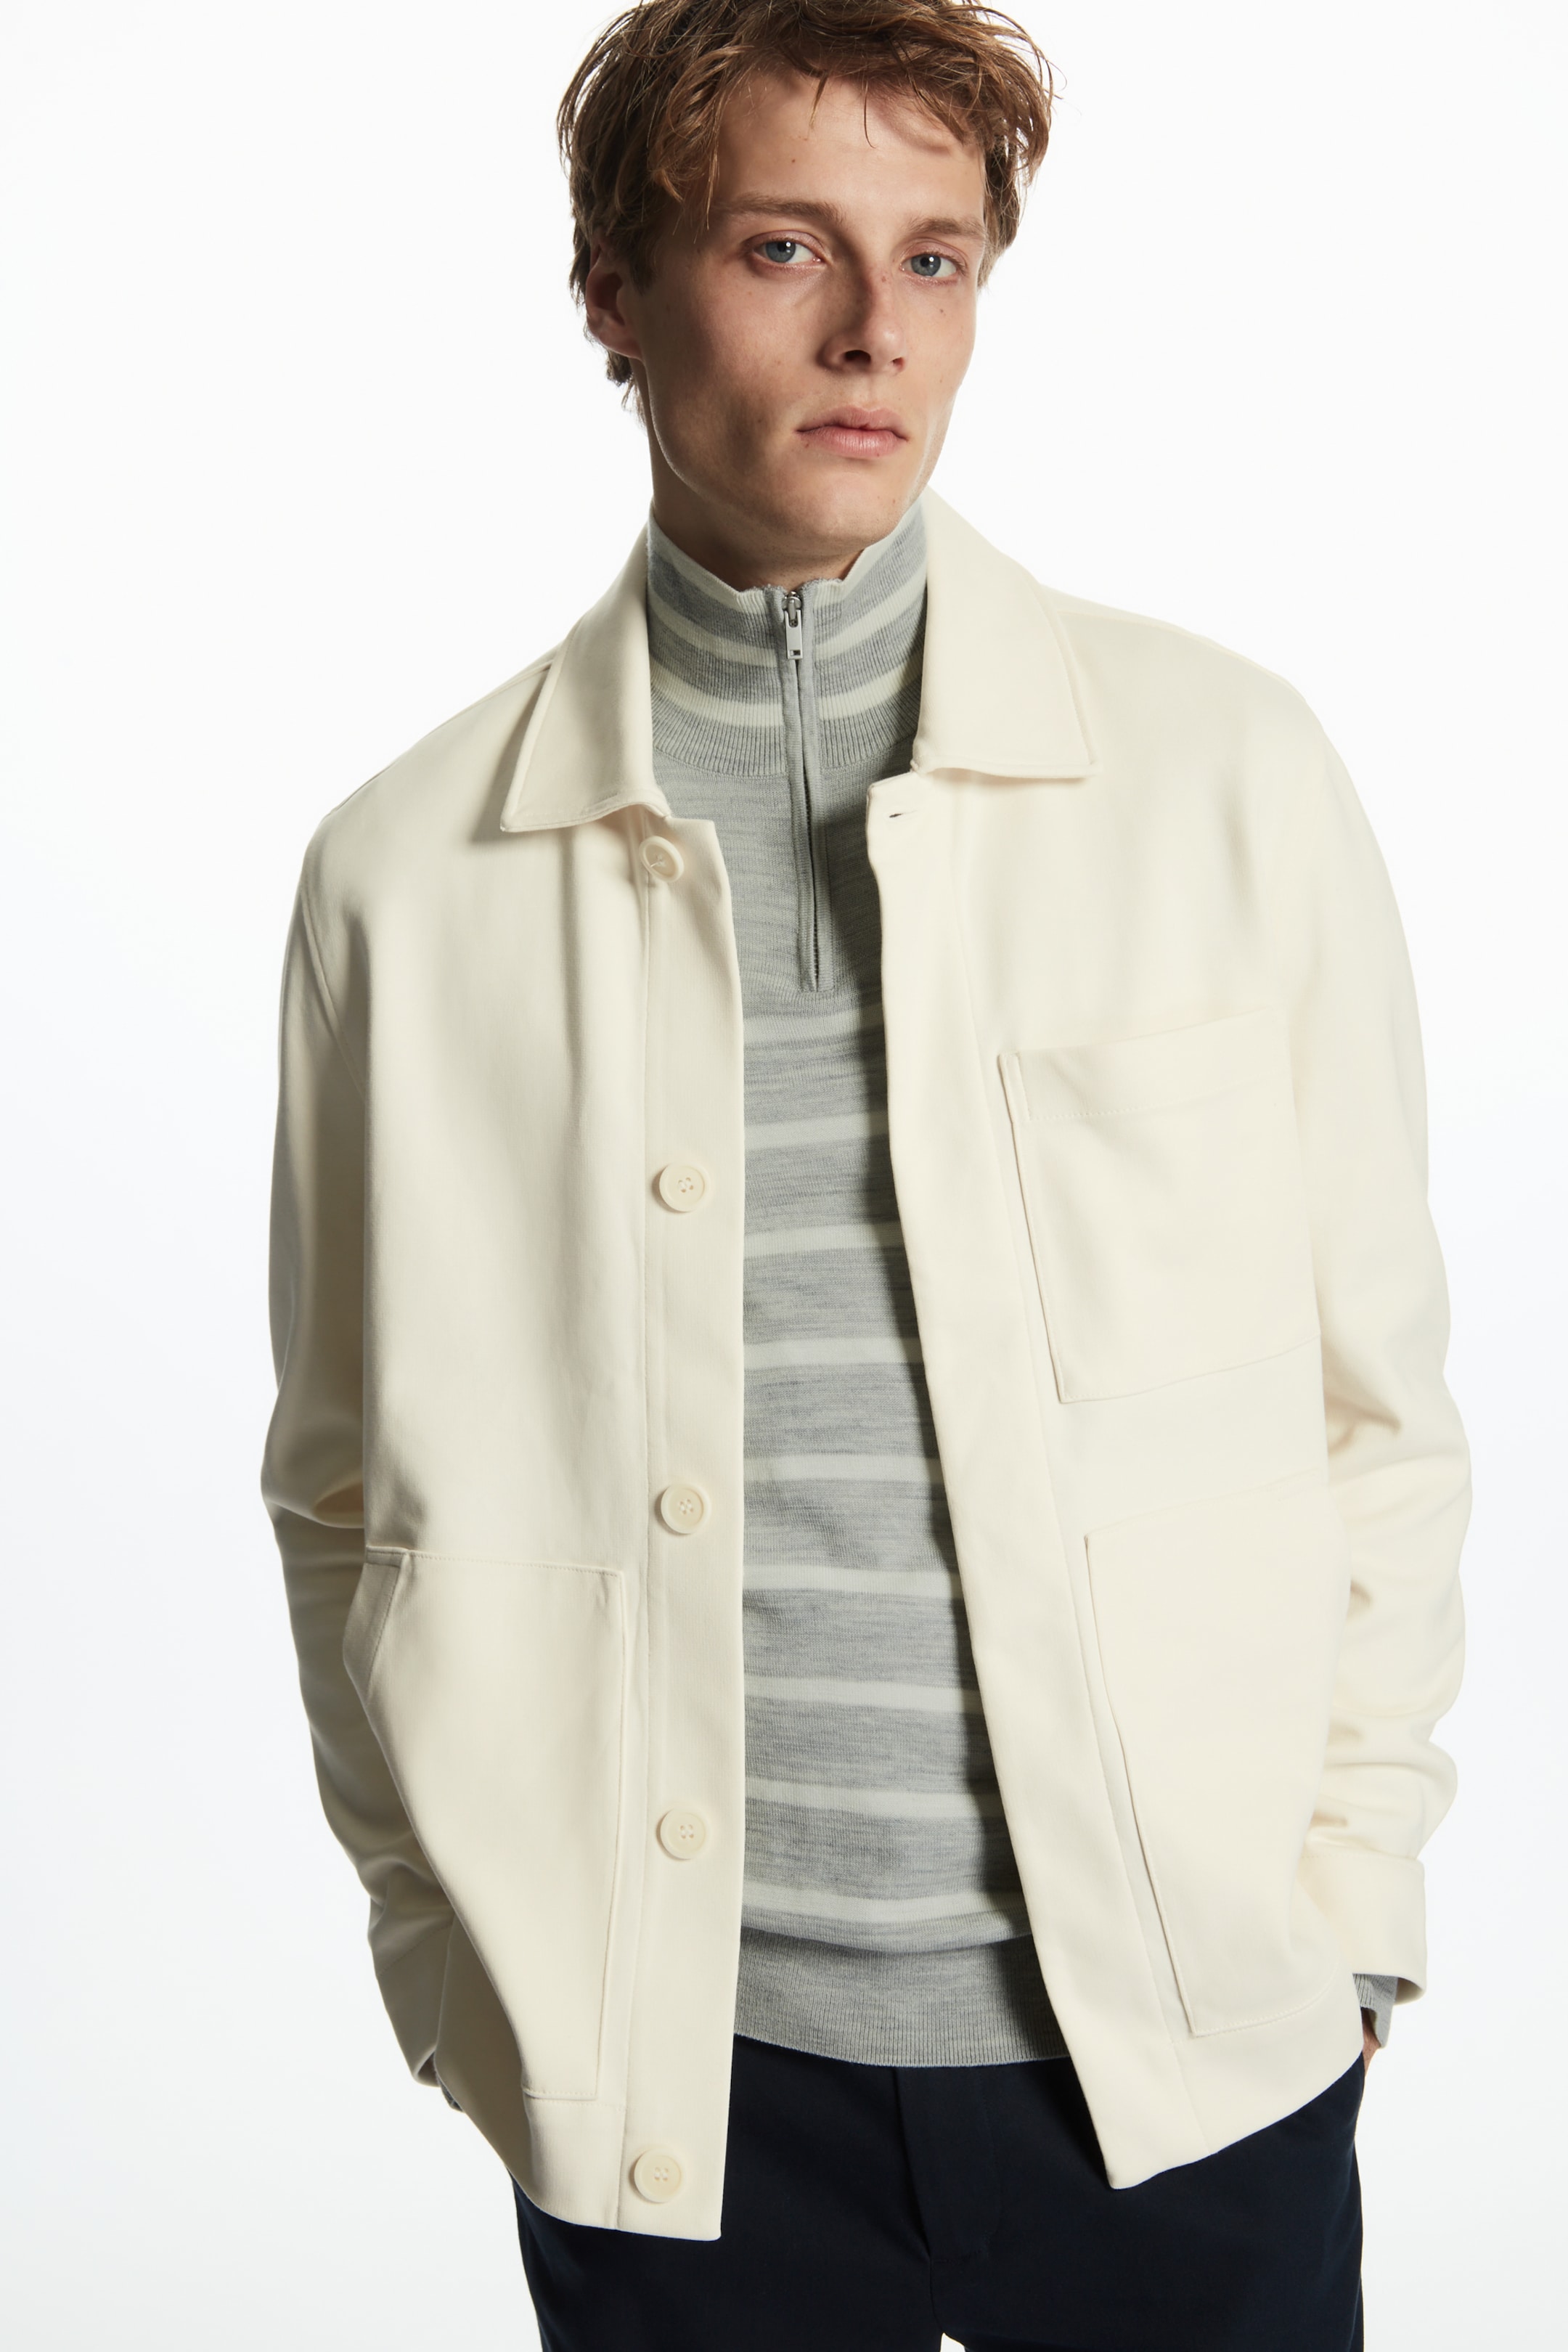 Front image of cos MINIMAL JERSEY JACKET in CREAM